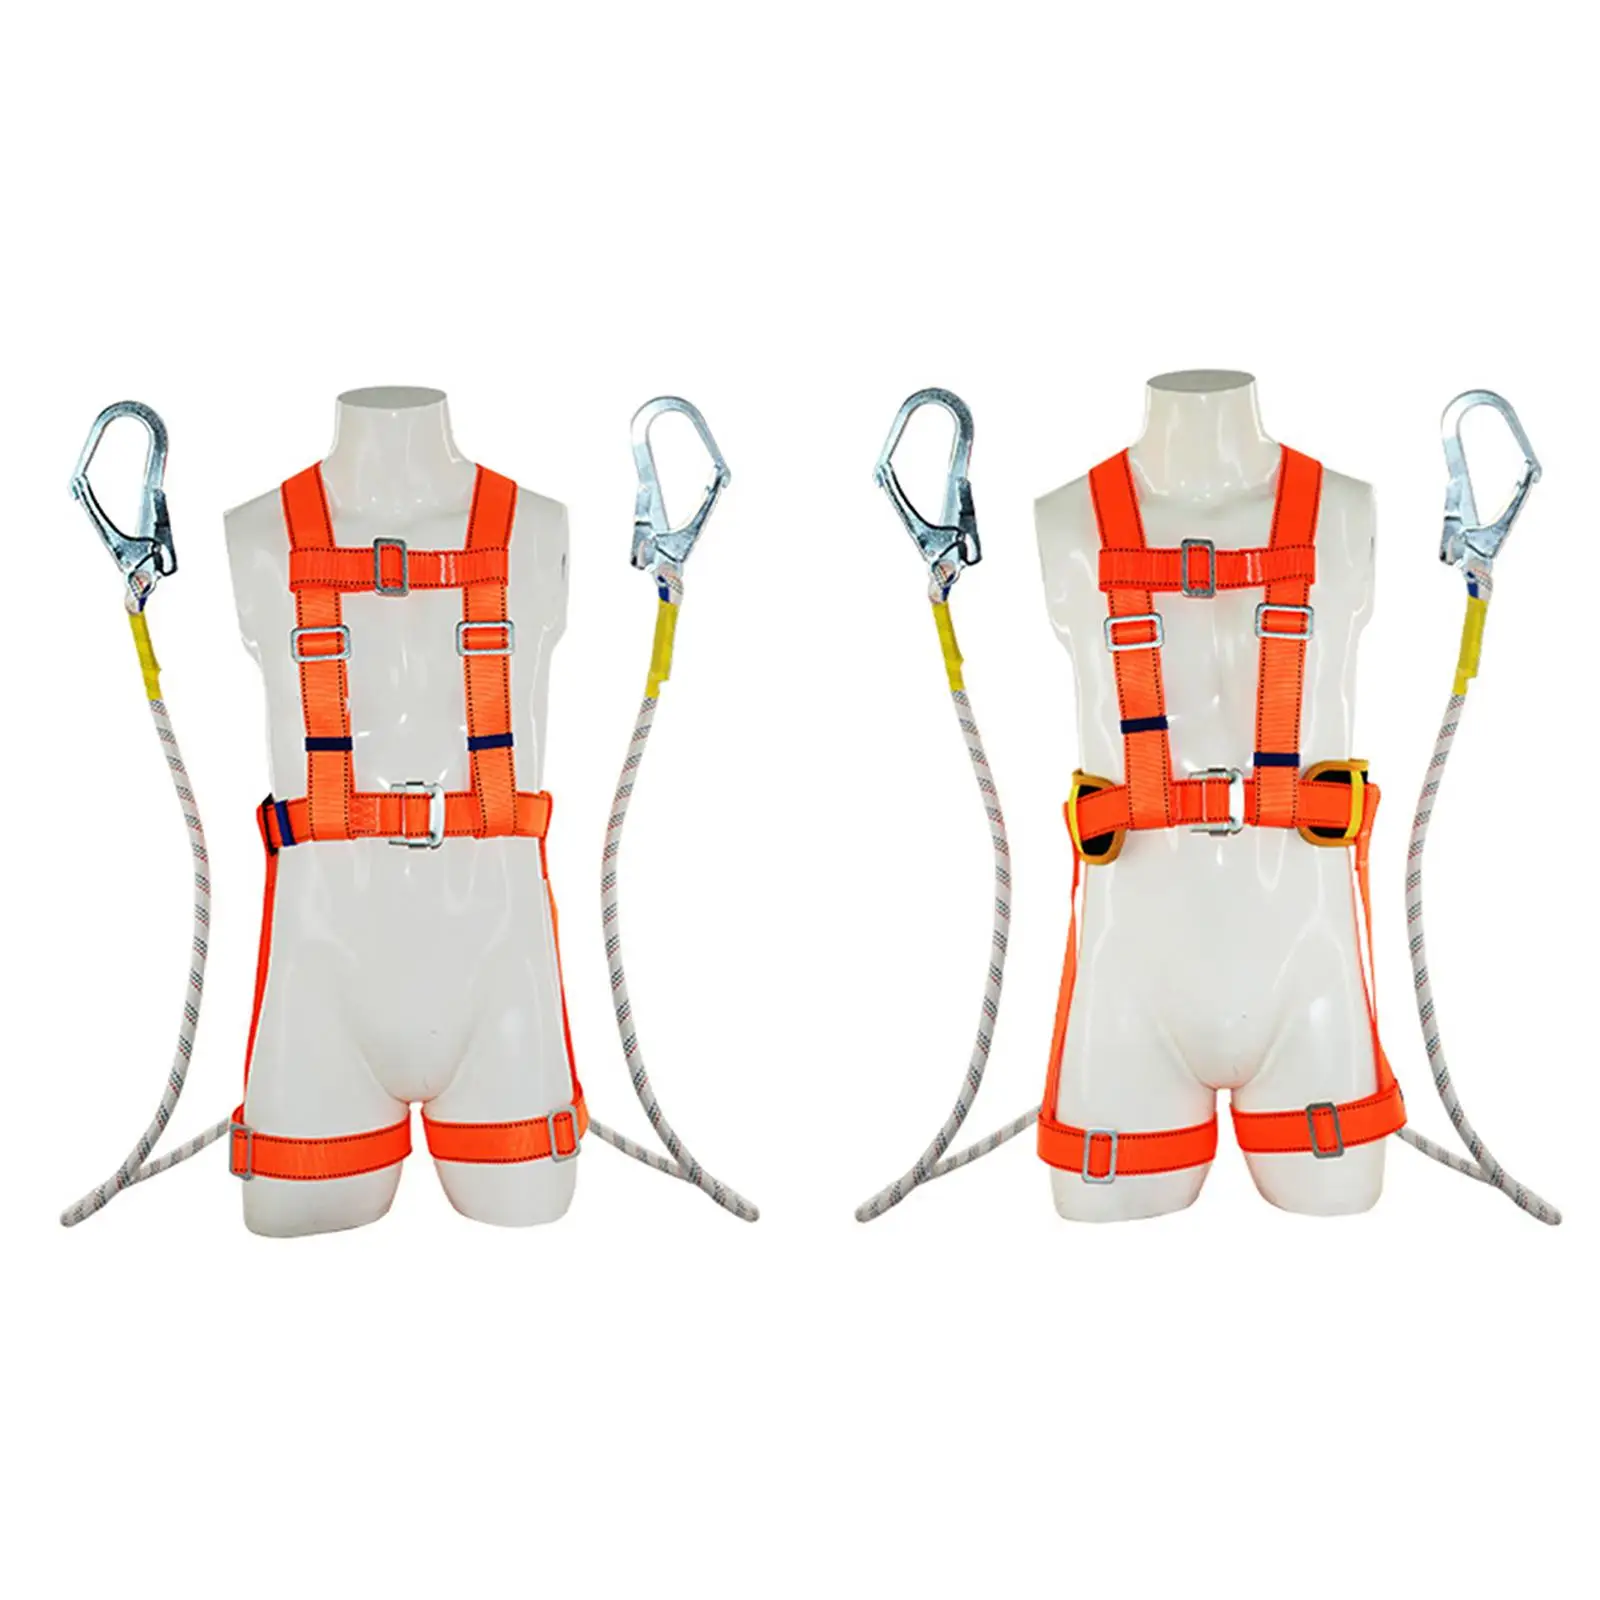 Fall Protection Safety Harness Waist Pad High Altitude Safety Belt for Electricians Roofing Outdoor Rock Climbing Hunting